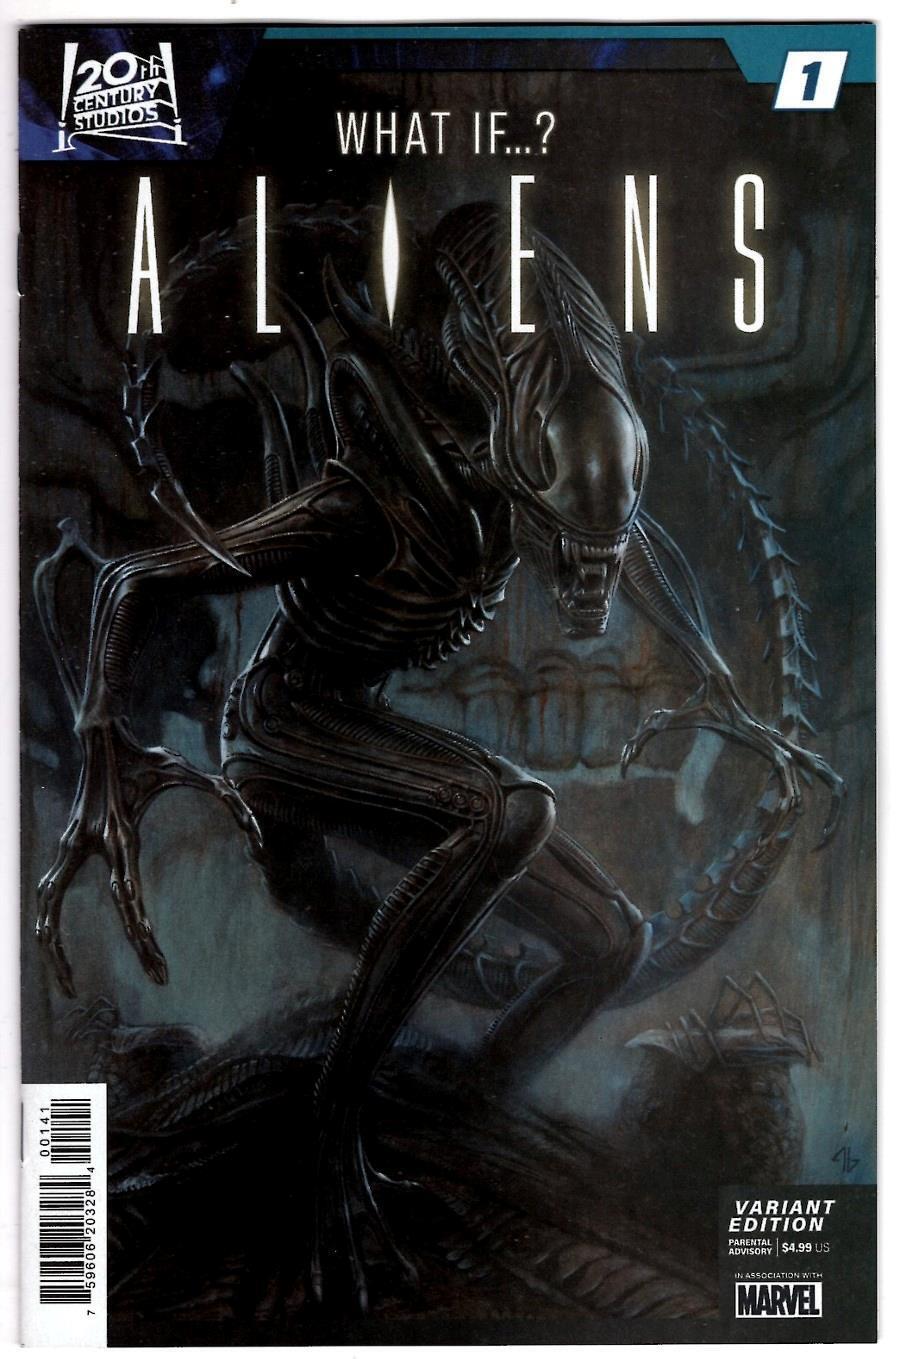 ALIENS WHAT IF #1 VARIANT ADI GRANOV MARVEL COMIC WHAT IF CARTER BURKE HAD LIVED